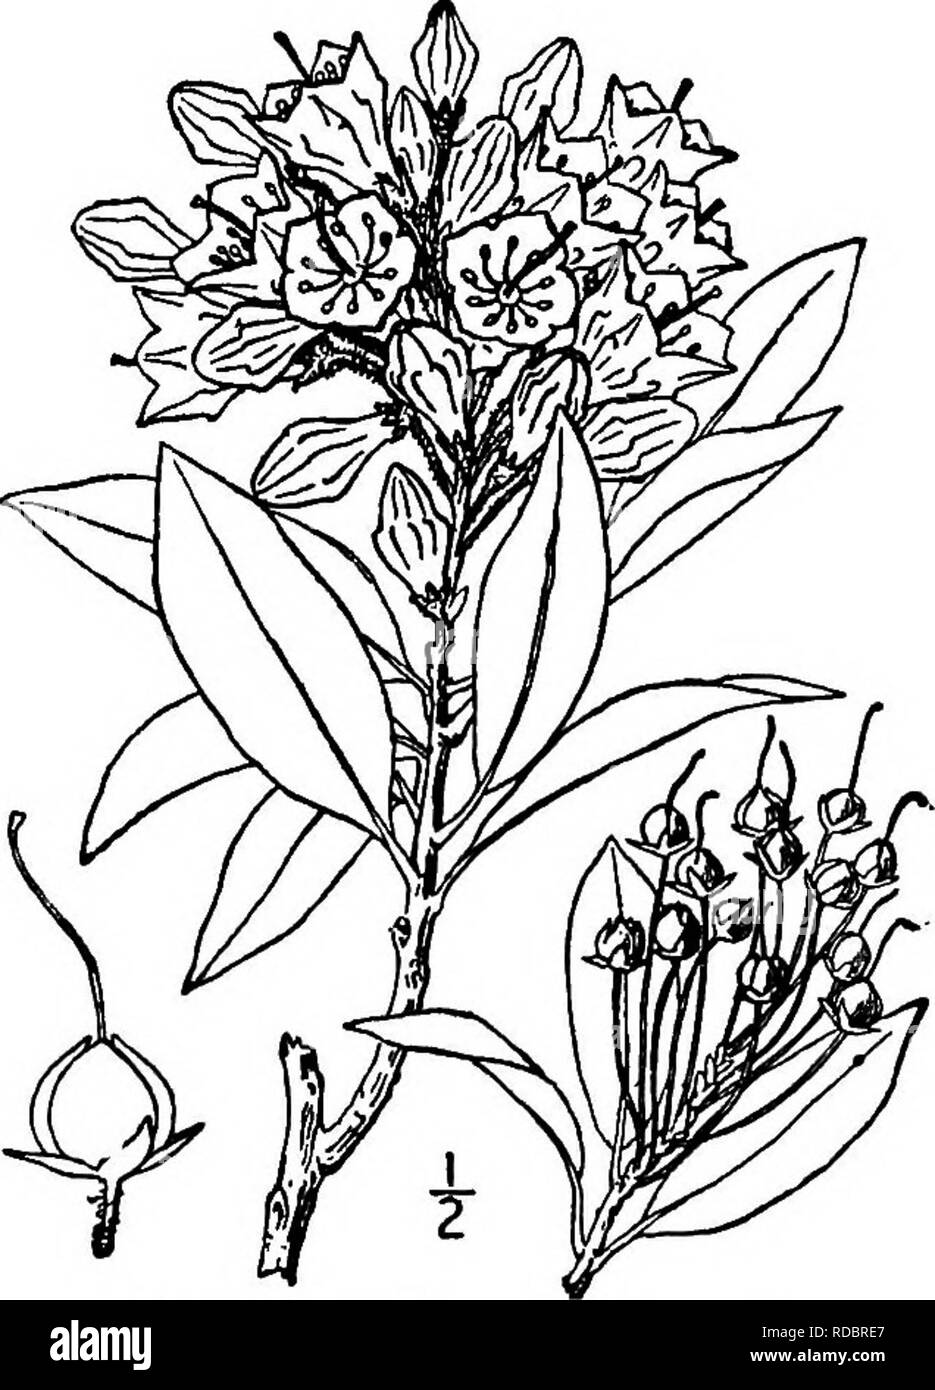 . North American trees : being descriptions and illustrations of the trees growing independently of cultivation in North America, north of Mexico and the West Indies . Trees. Mountain Laurel 755 III. MOUNTAIN LAUREL GENUS KALMIA. LINN^US Species Ealmia latdf olia Linnaeus HIS beautiful small evergreen tree or shrub is well known from New Brunswick and Ontario to Ohio, Arkansas, Florida and Louisijina. In the North it grows mostly in moist soil near swamps, but south- ward it is found on dry or rocky hillsides, reaching a maximum height of 12 meters, with a trunk diameter of 5 dm. It is so well Stock Photo